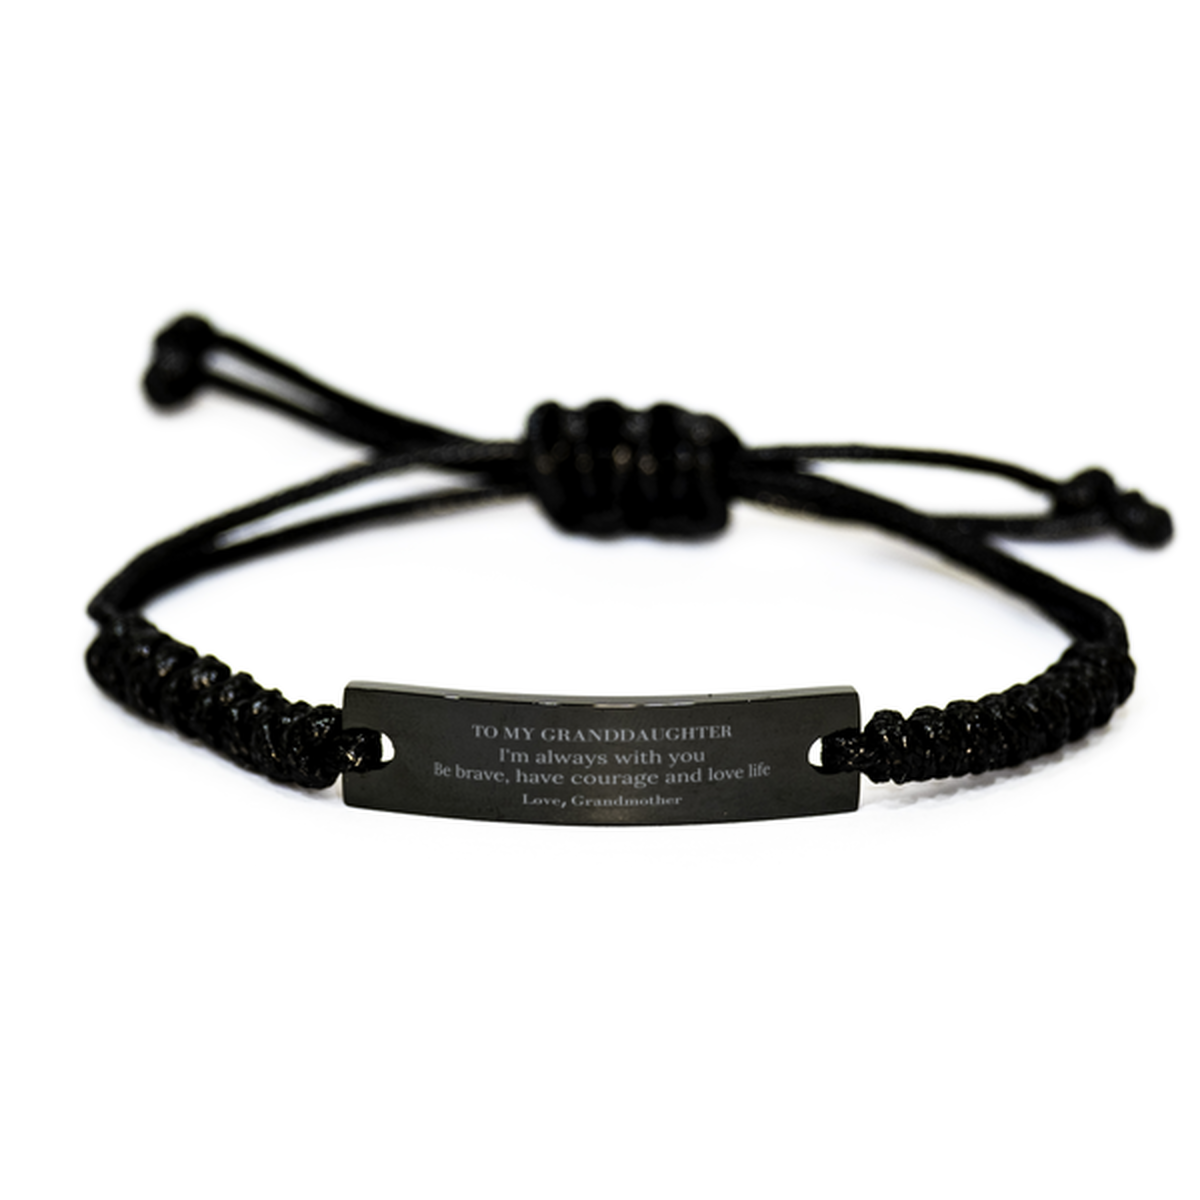 To My Granddaughter Gifts from Grandmother, Unique Black Rope Bracelet Inspirational Christmas Birthday Graduation Gifts for Granddaughter I'm always with you. Be brave, have courage and love life. Love, Grandmother